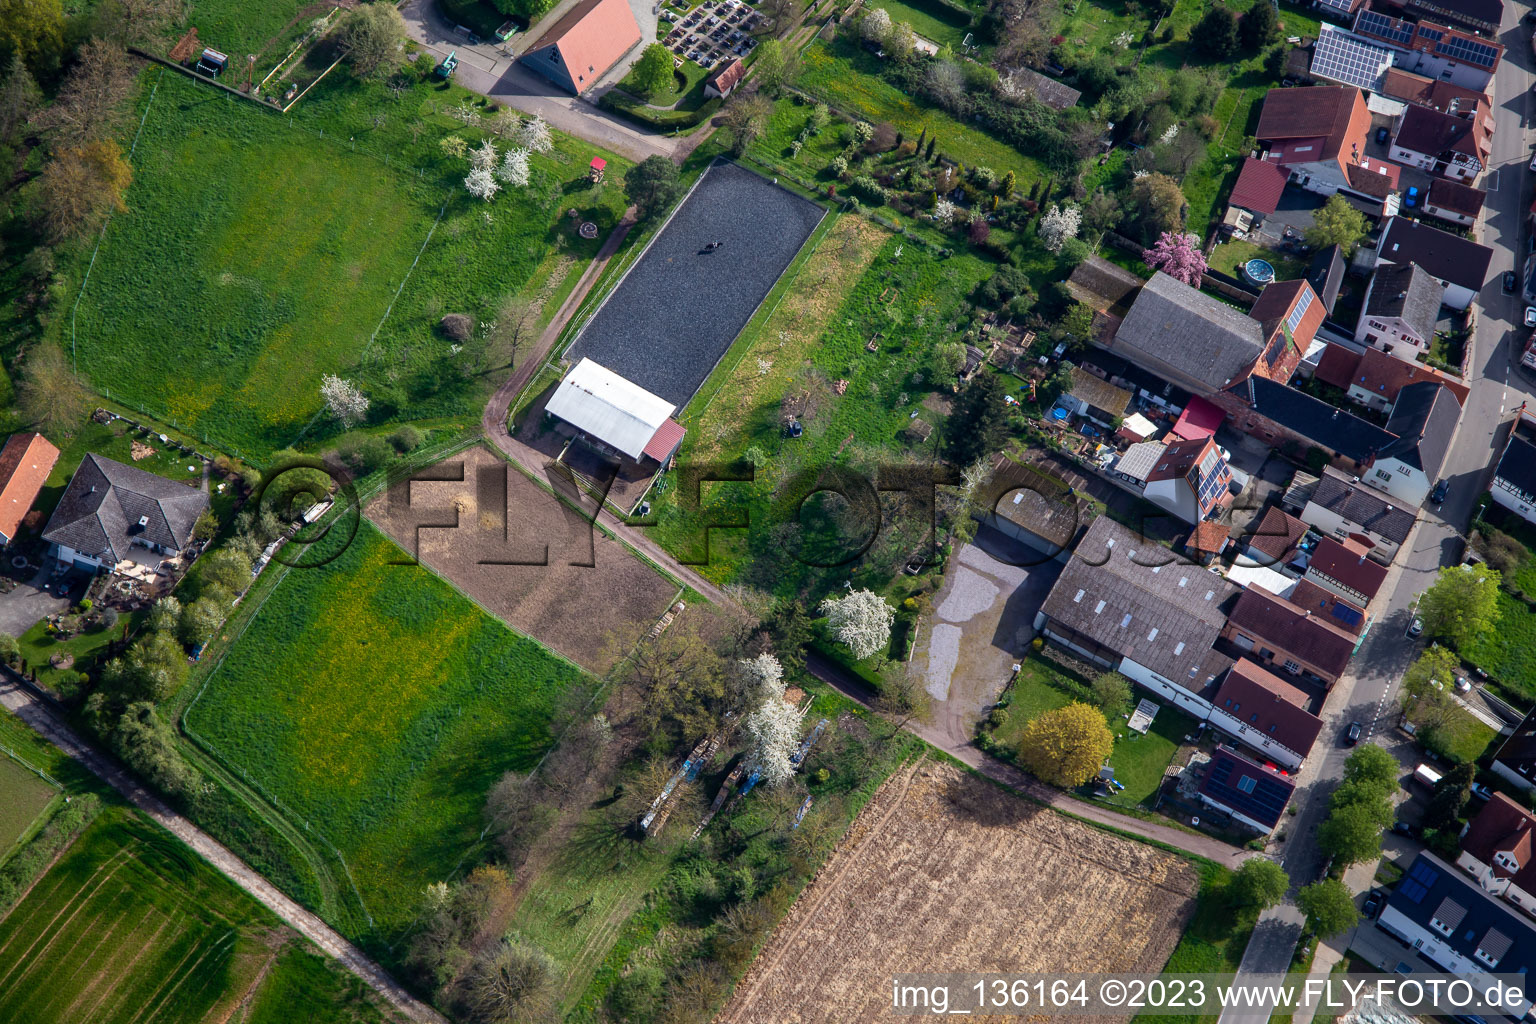 Equestrian facility at the cemetery in Winden in the state Rhineland-Palatinate, Germany from the plane